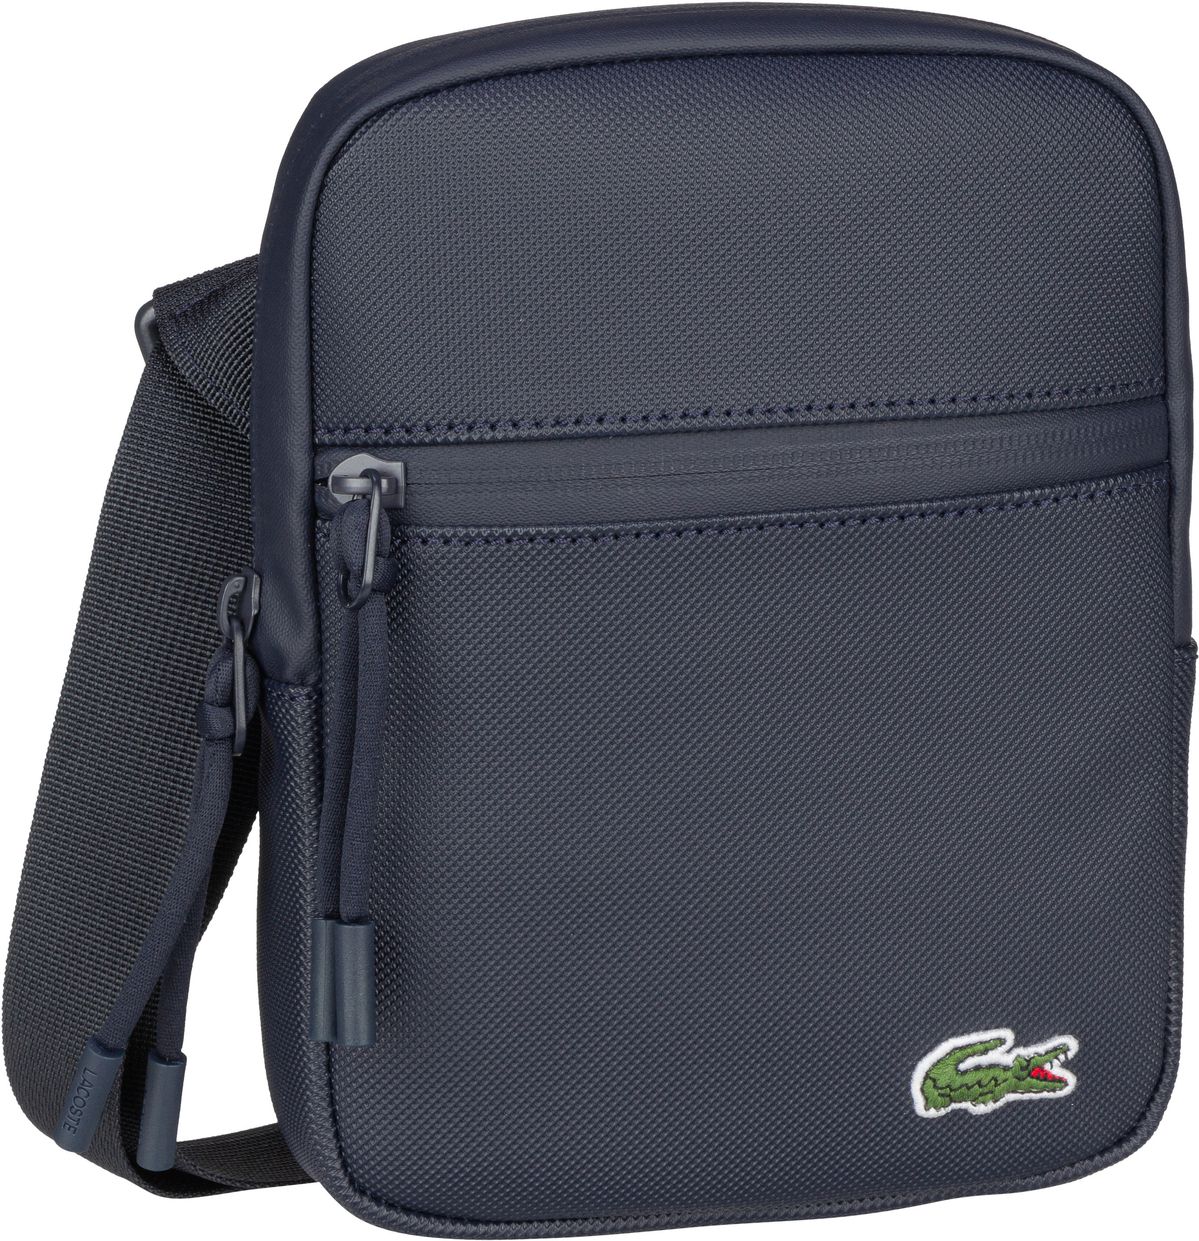 Lacoste LCST Crossover Bag 3307 - Eclipse